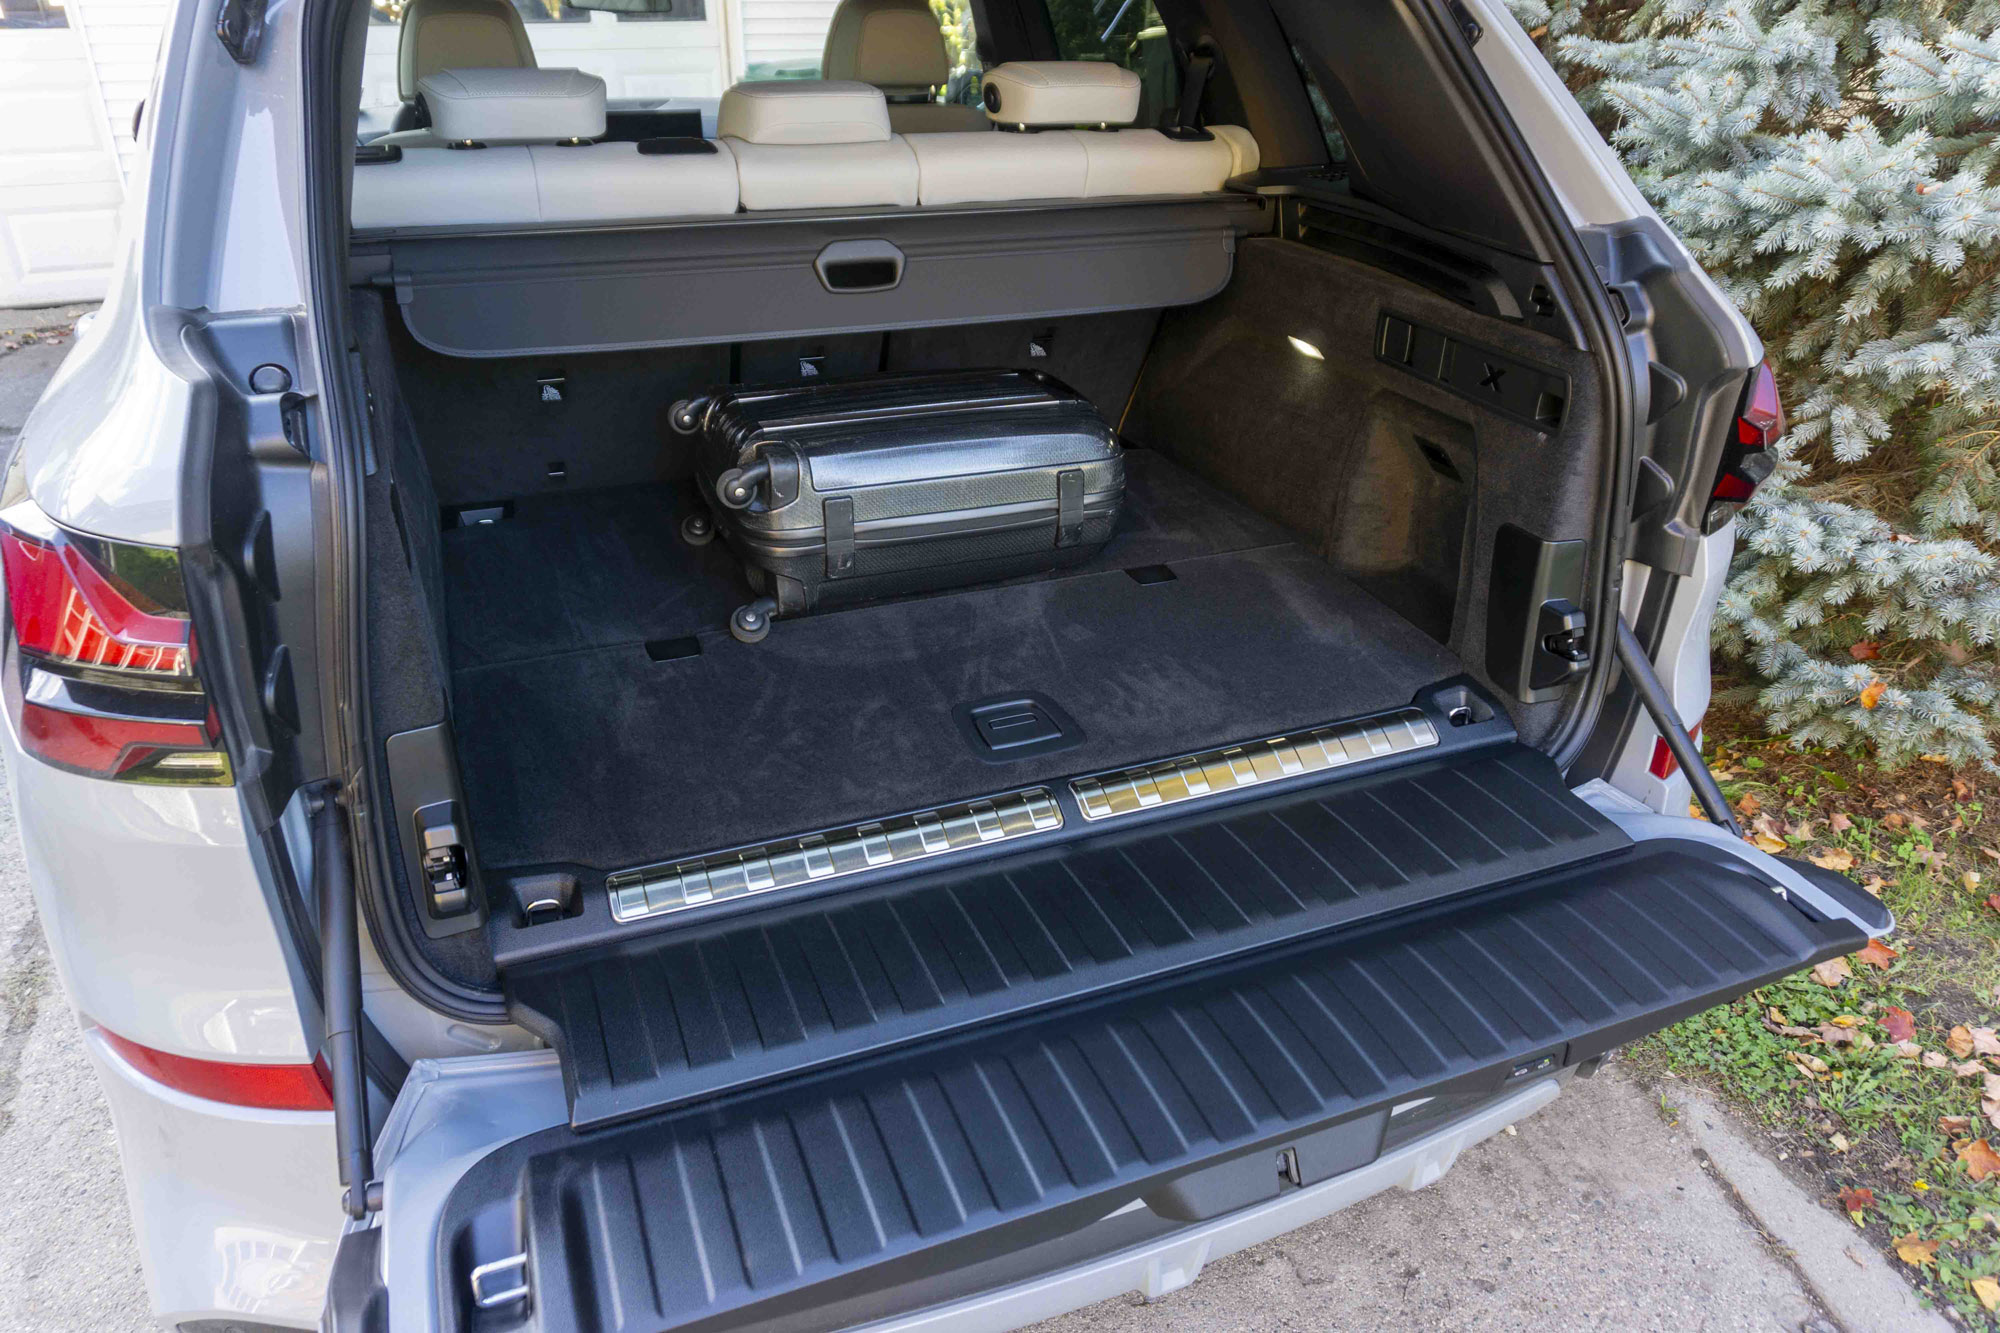 2024 BMW X5 xDrive50e cargo area with small suitcase and open tailgate and liftgate